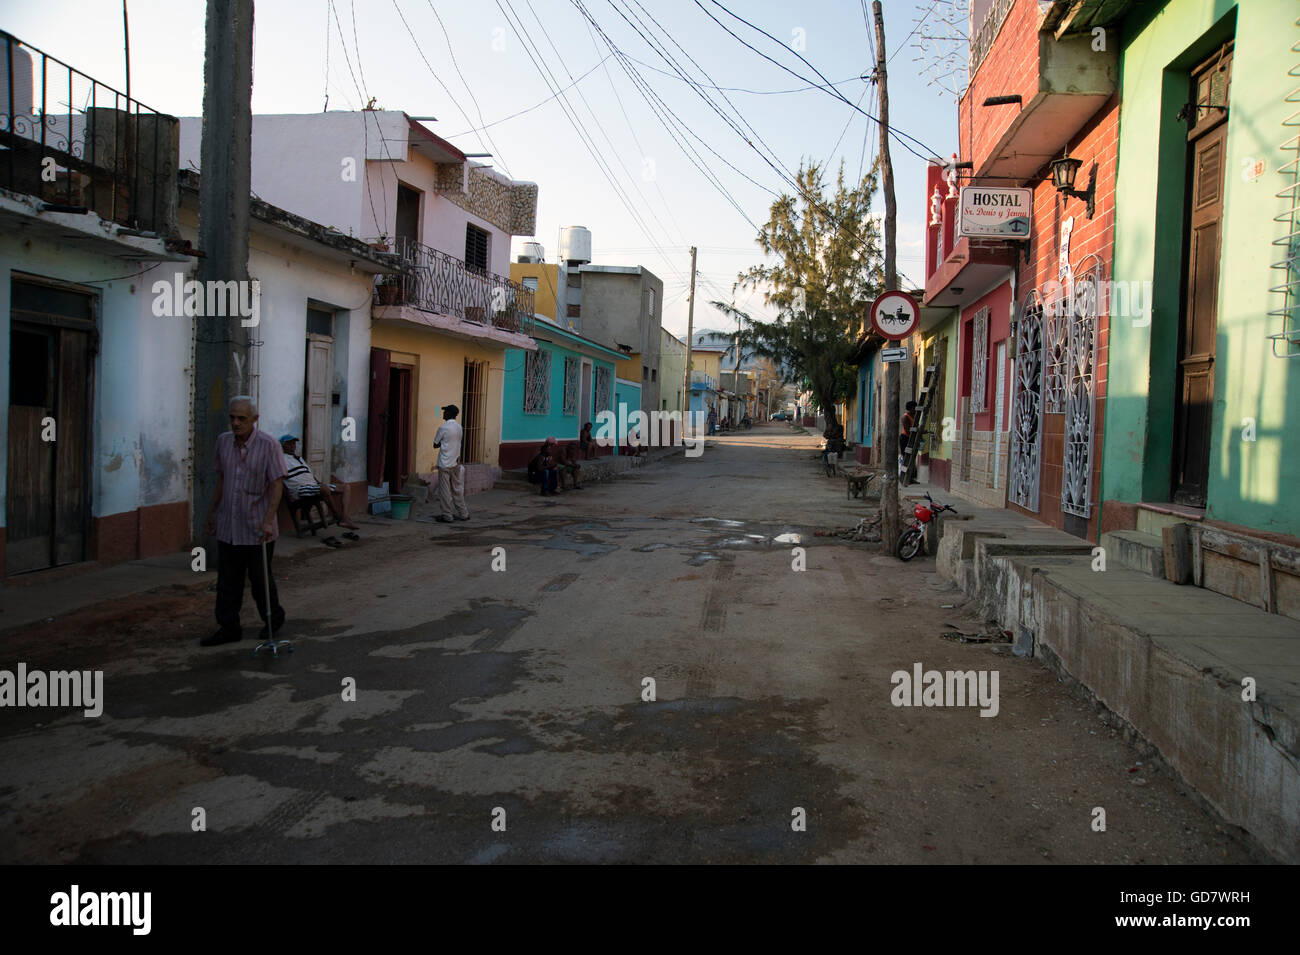 Cuban men hang around a neglected street of traditional houses in a rundown area of Trinidad Cuba Stock Photo